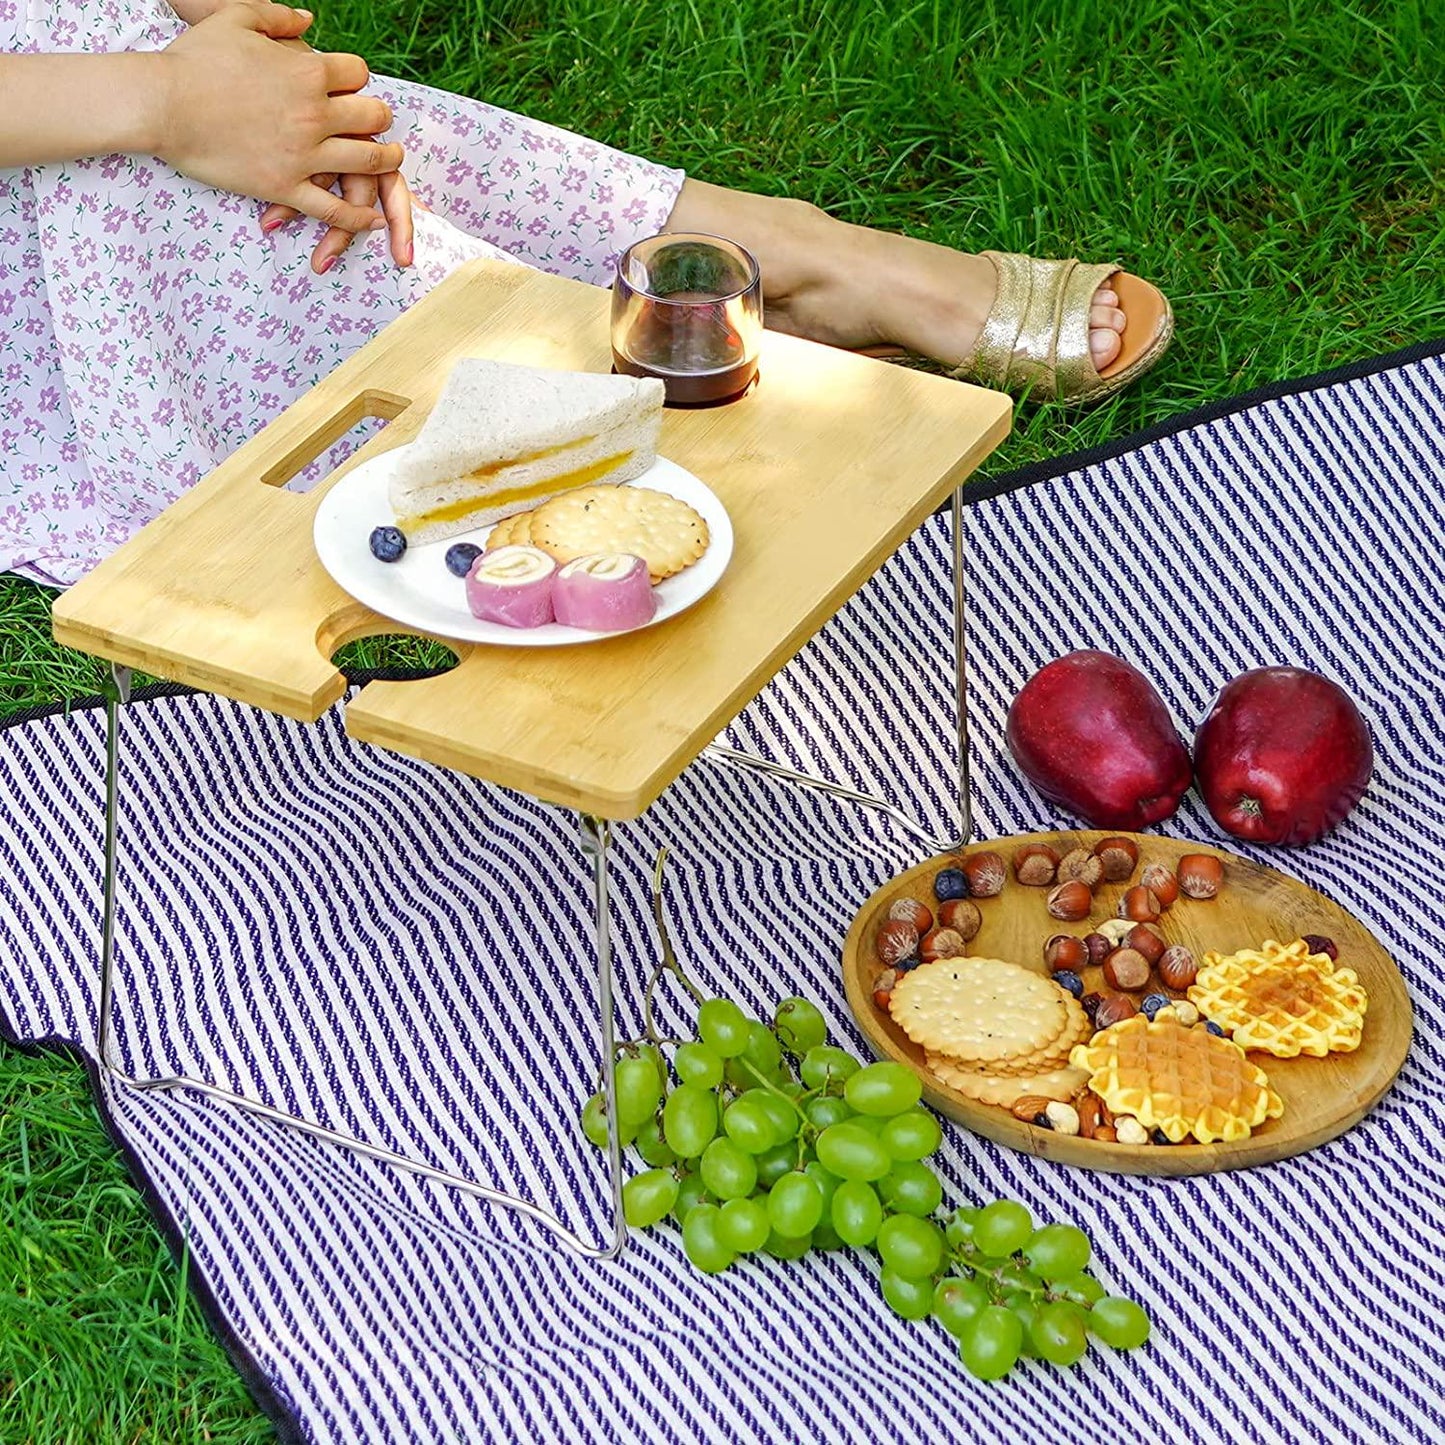 Wicker Picnic Basket for 2 with Detachable Table, Elasticated Wine Holder, Shoulder Carrying Willow Picnic Hamper Set with Premium Tableware and Blanket